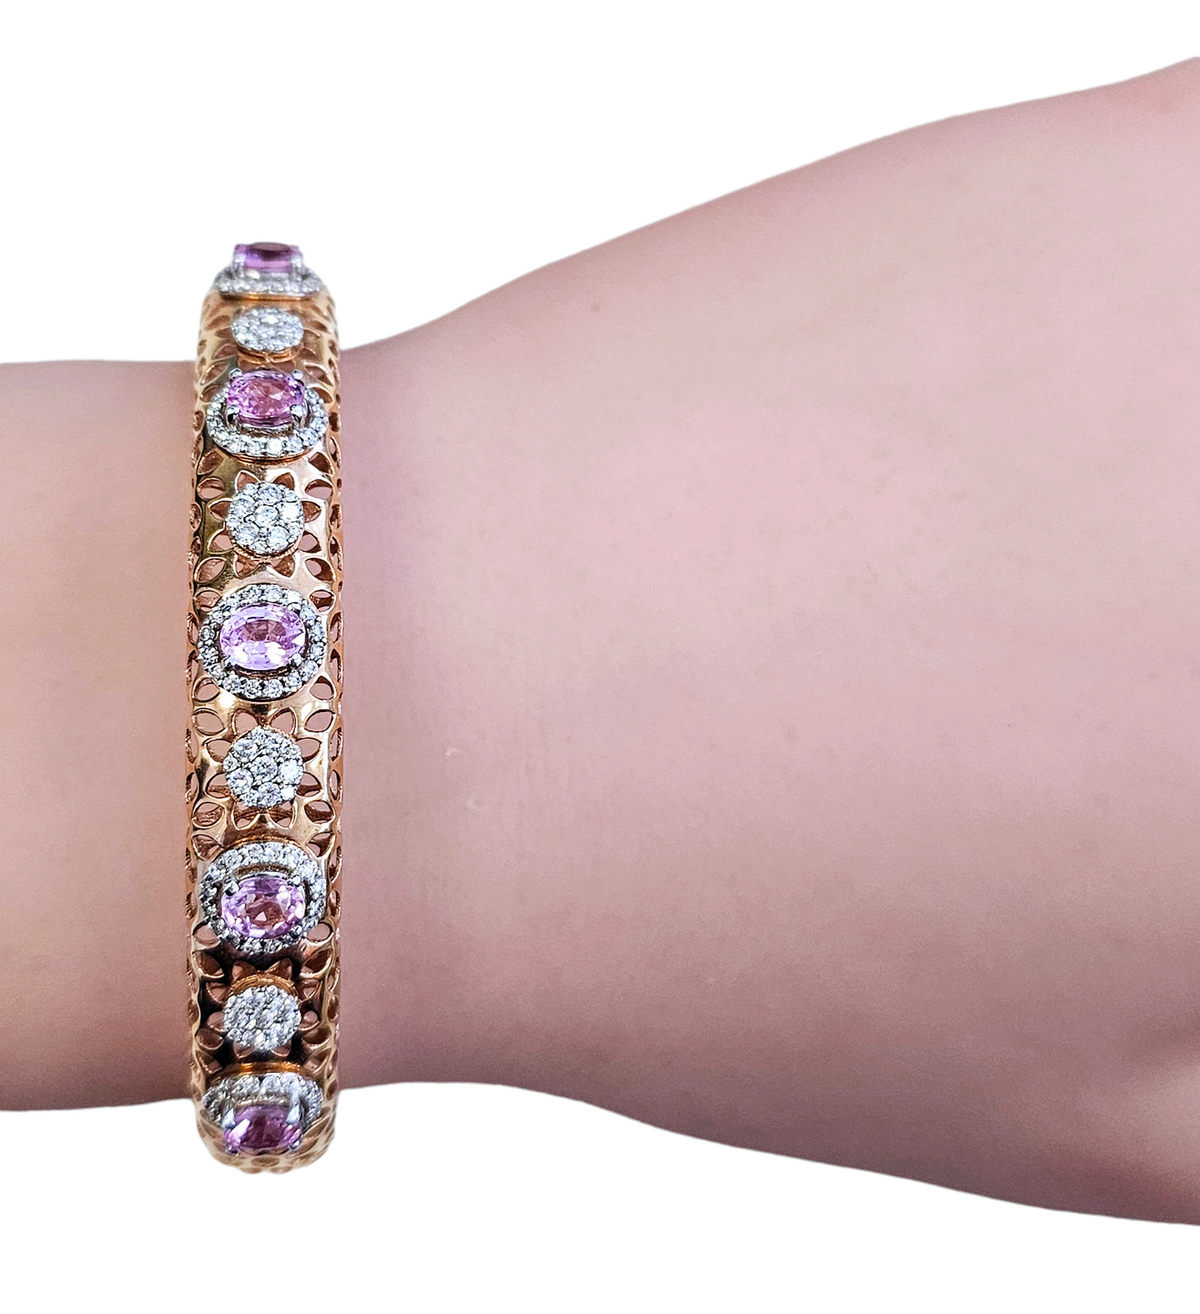 Pink Sapphire and Diamond Negative Space Style Bangle Bracelet made in 18-Karat Rose Gold